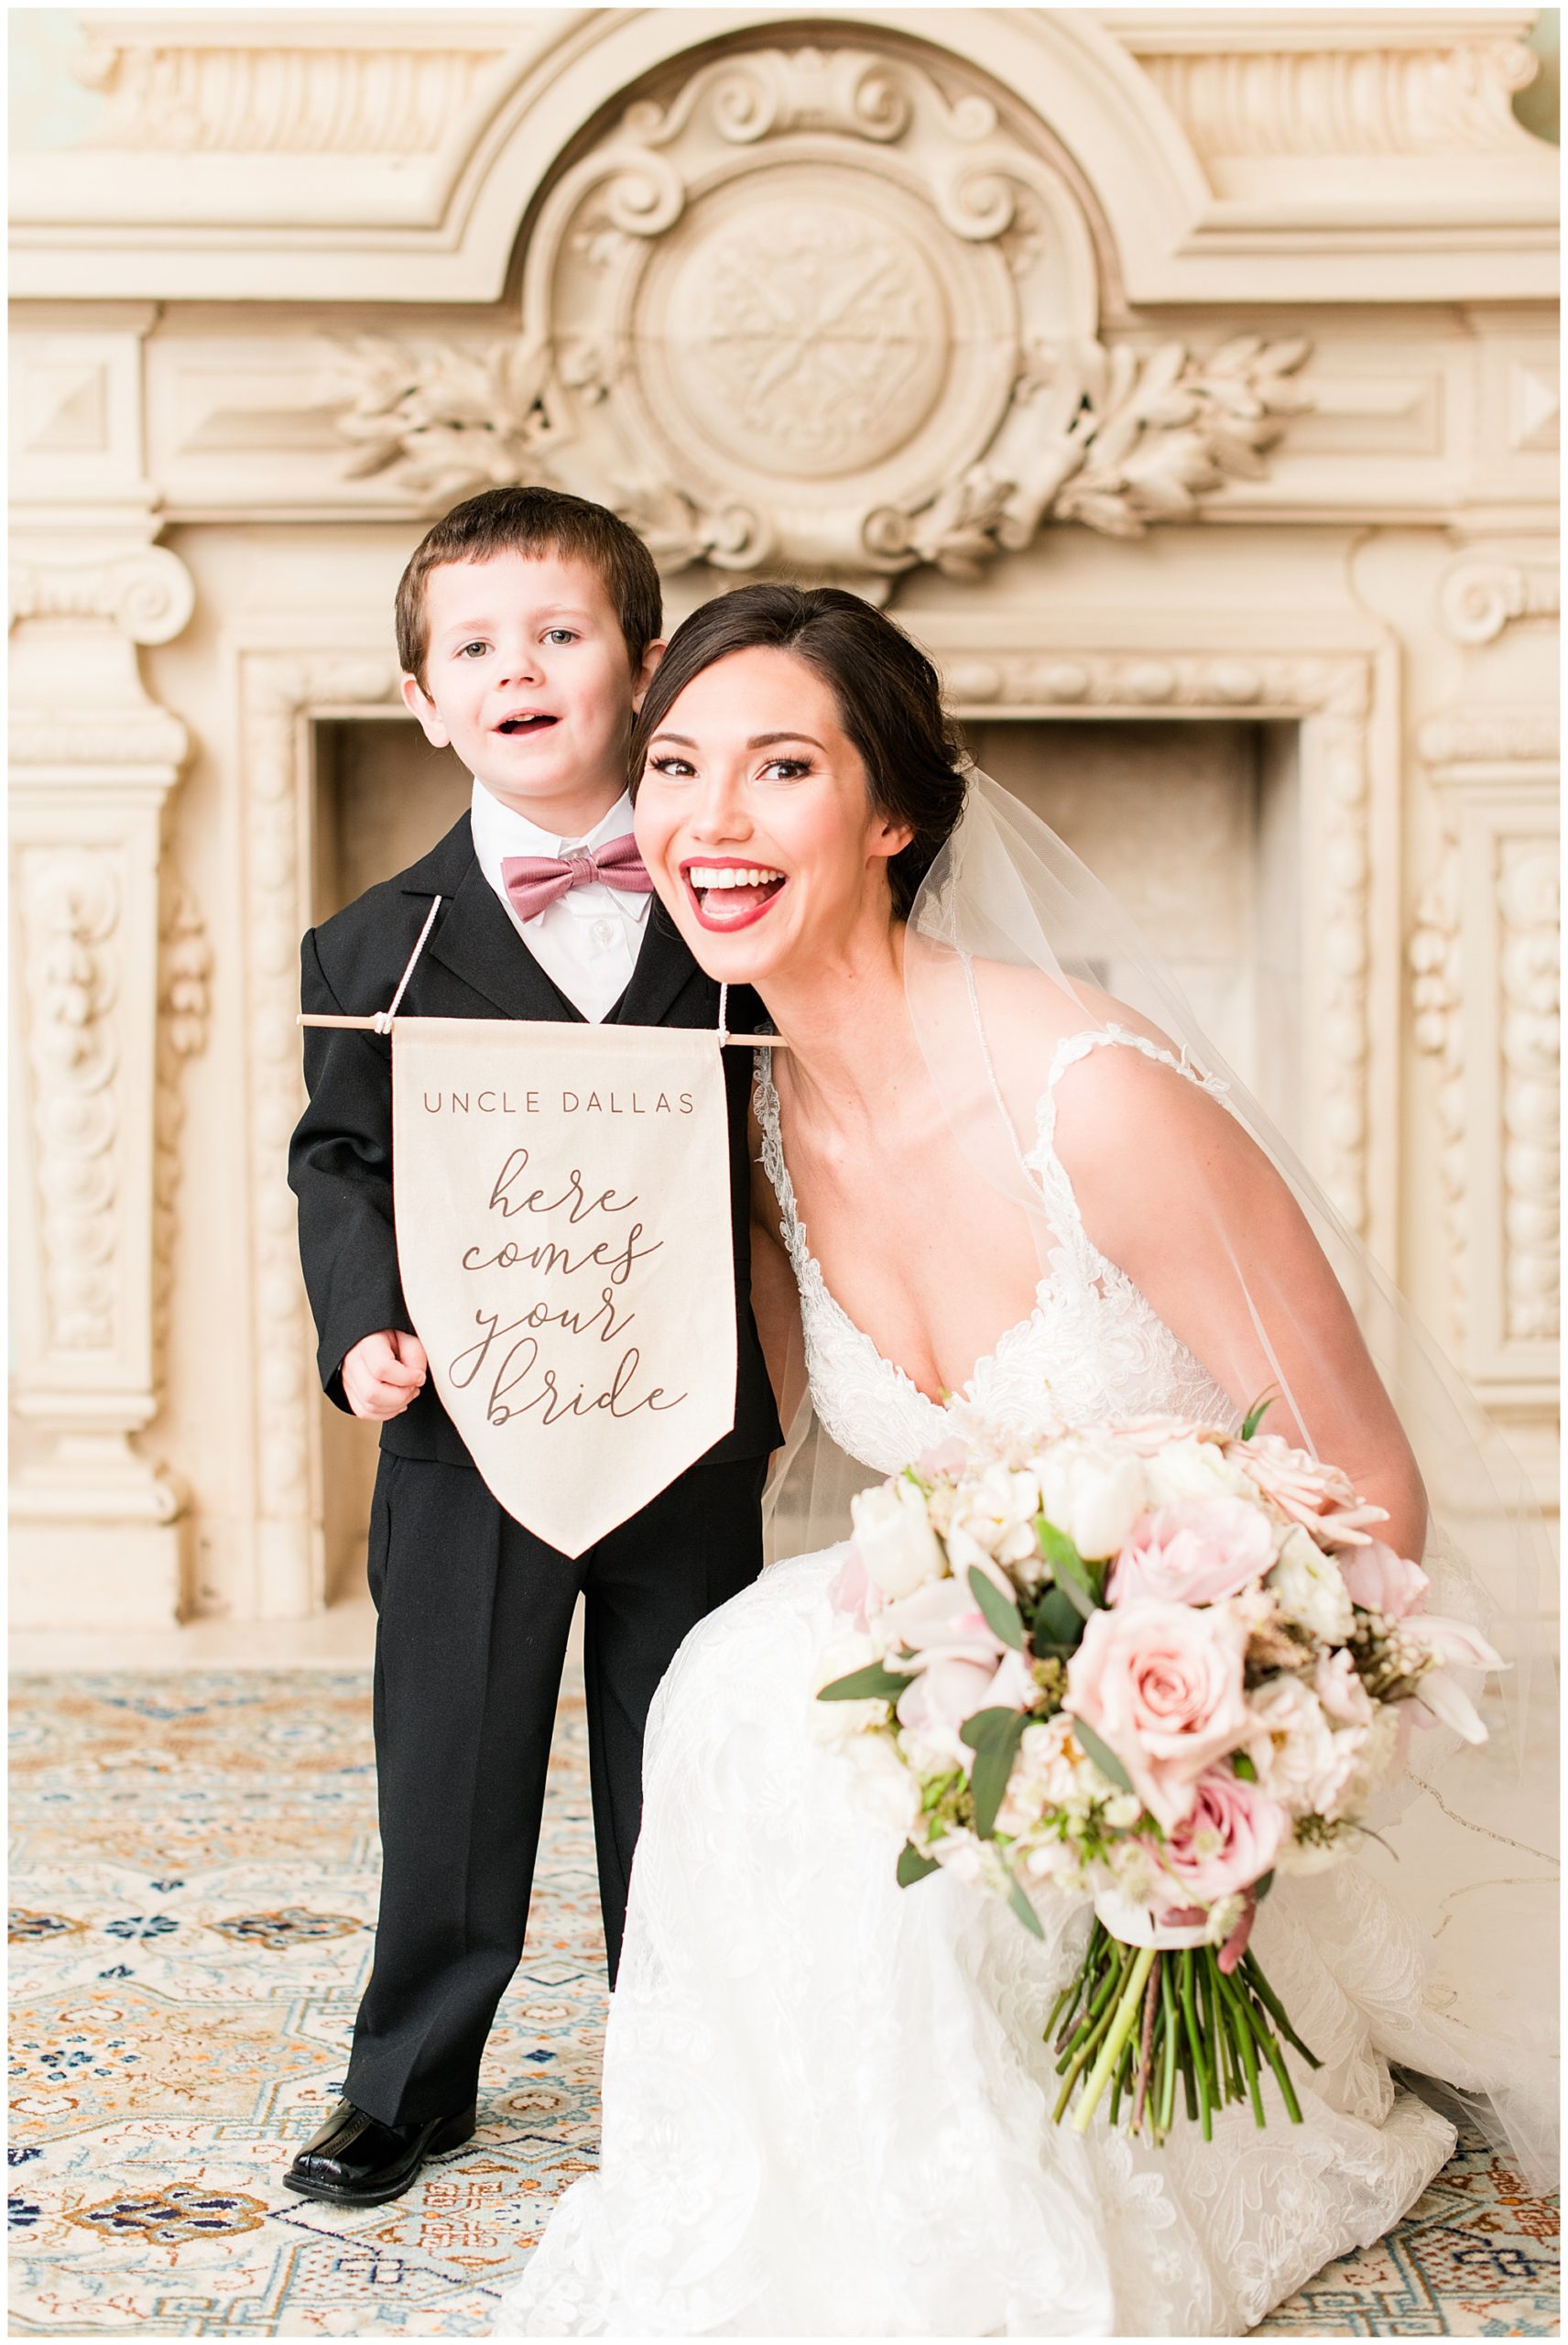 romantic dover hall wedding in january. by richmond rva wedding photographer, sarah & dave photography. classic wedding theme. fairytale inspired. disney inspired at dover hall estate.